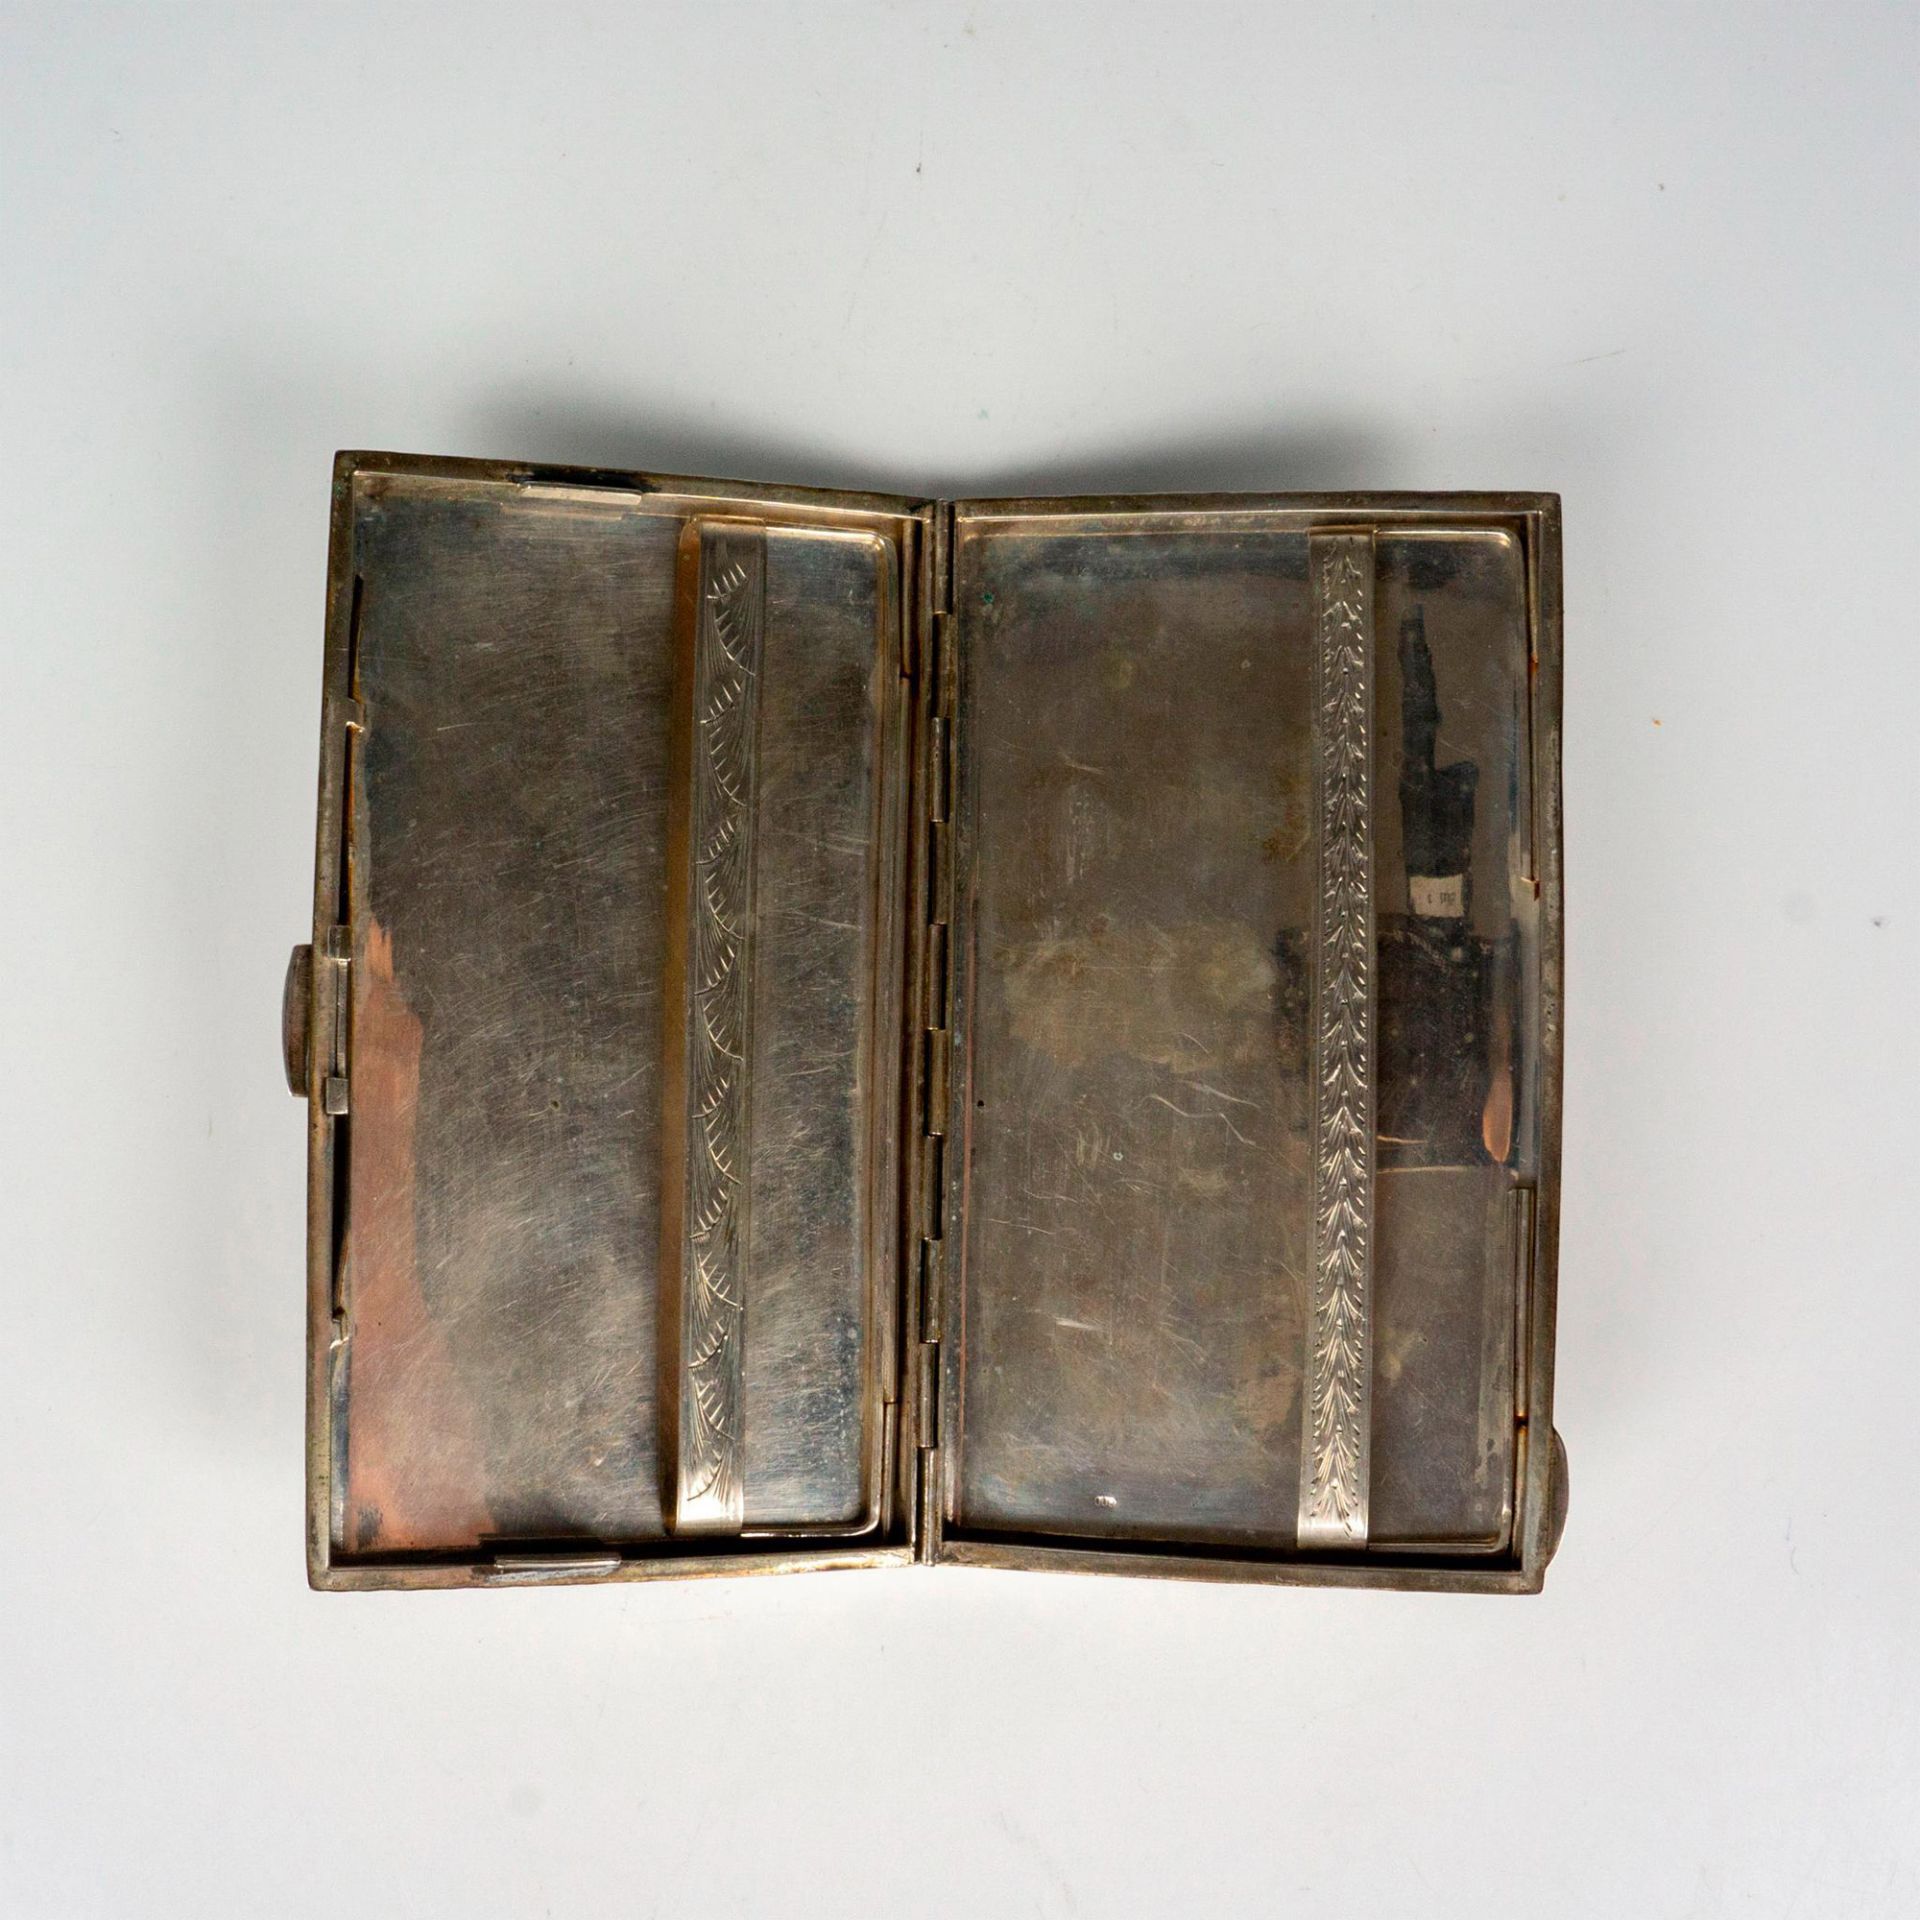 800 Silver Hinged Cigarette Case, Leaf and Scroll Motif - Image 2 of 3